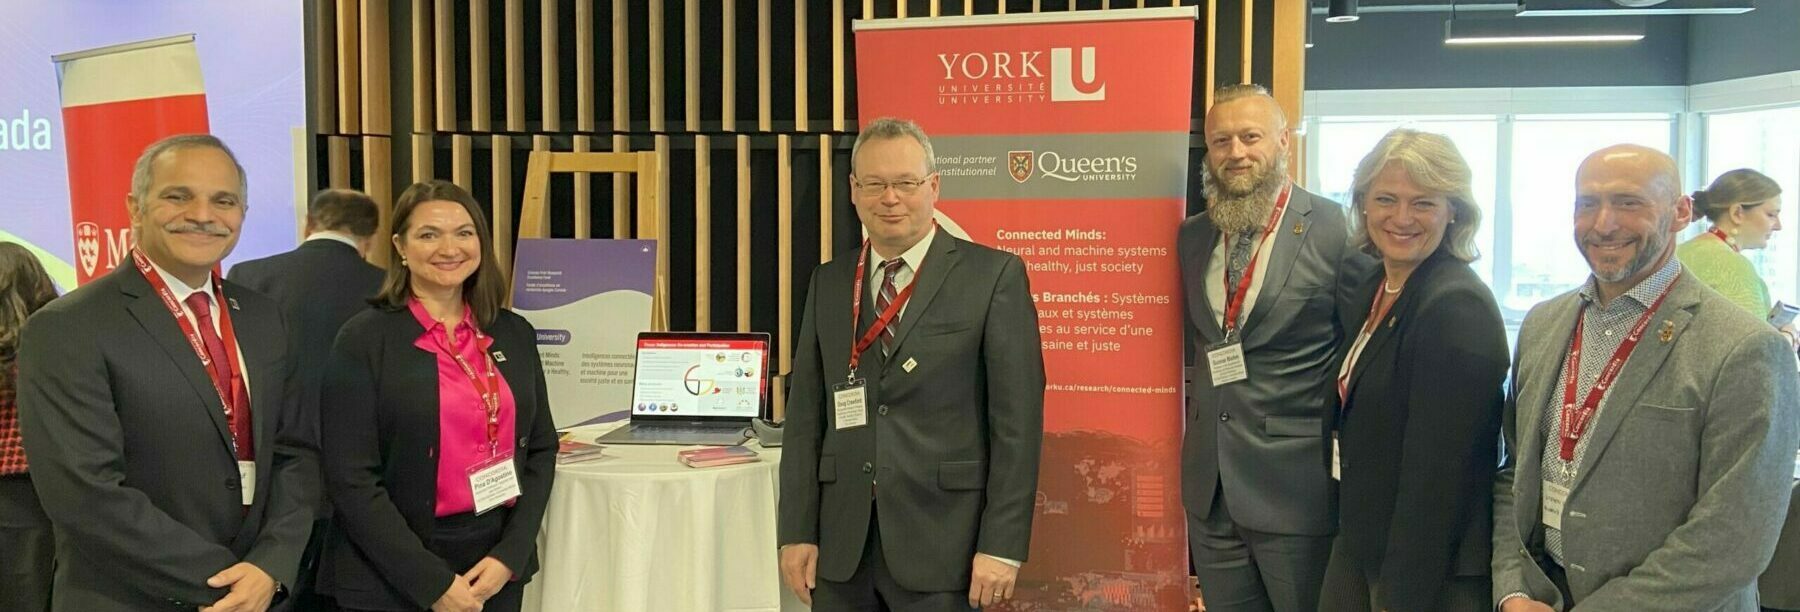 York University's Amir Asif, Pina D'Agostino and Doug Crawford with representatives from Queen's University